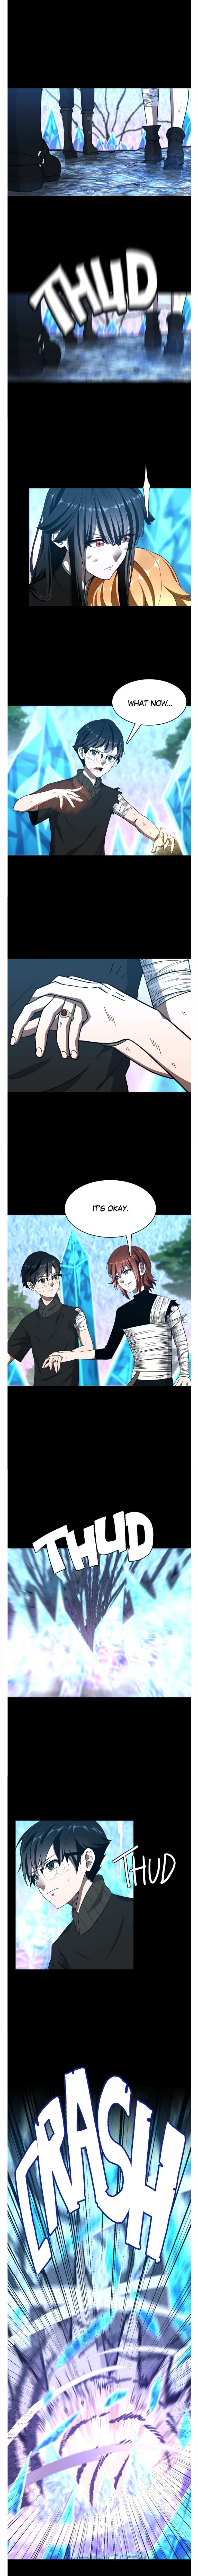 The Beginning After the End - Chapter 70 Page 6